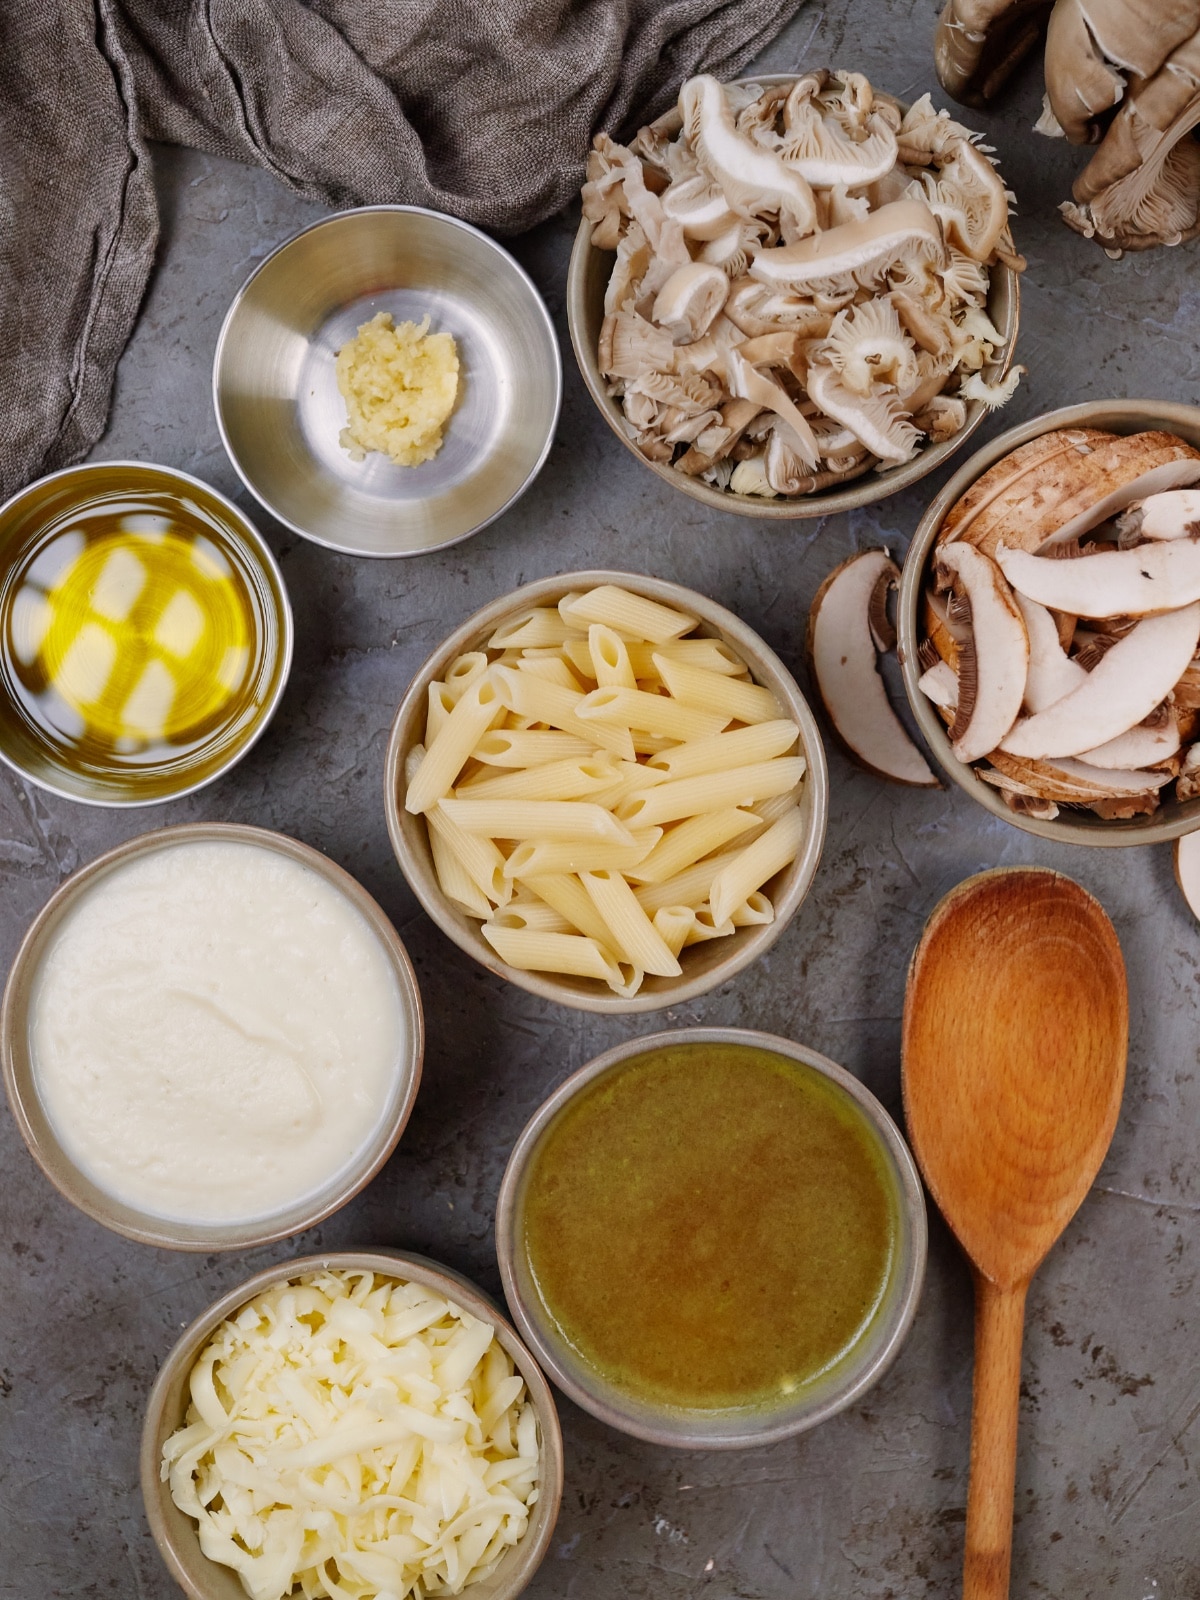 ingredients for creamy mushroom casserole in small bowls